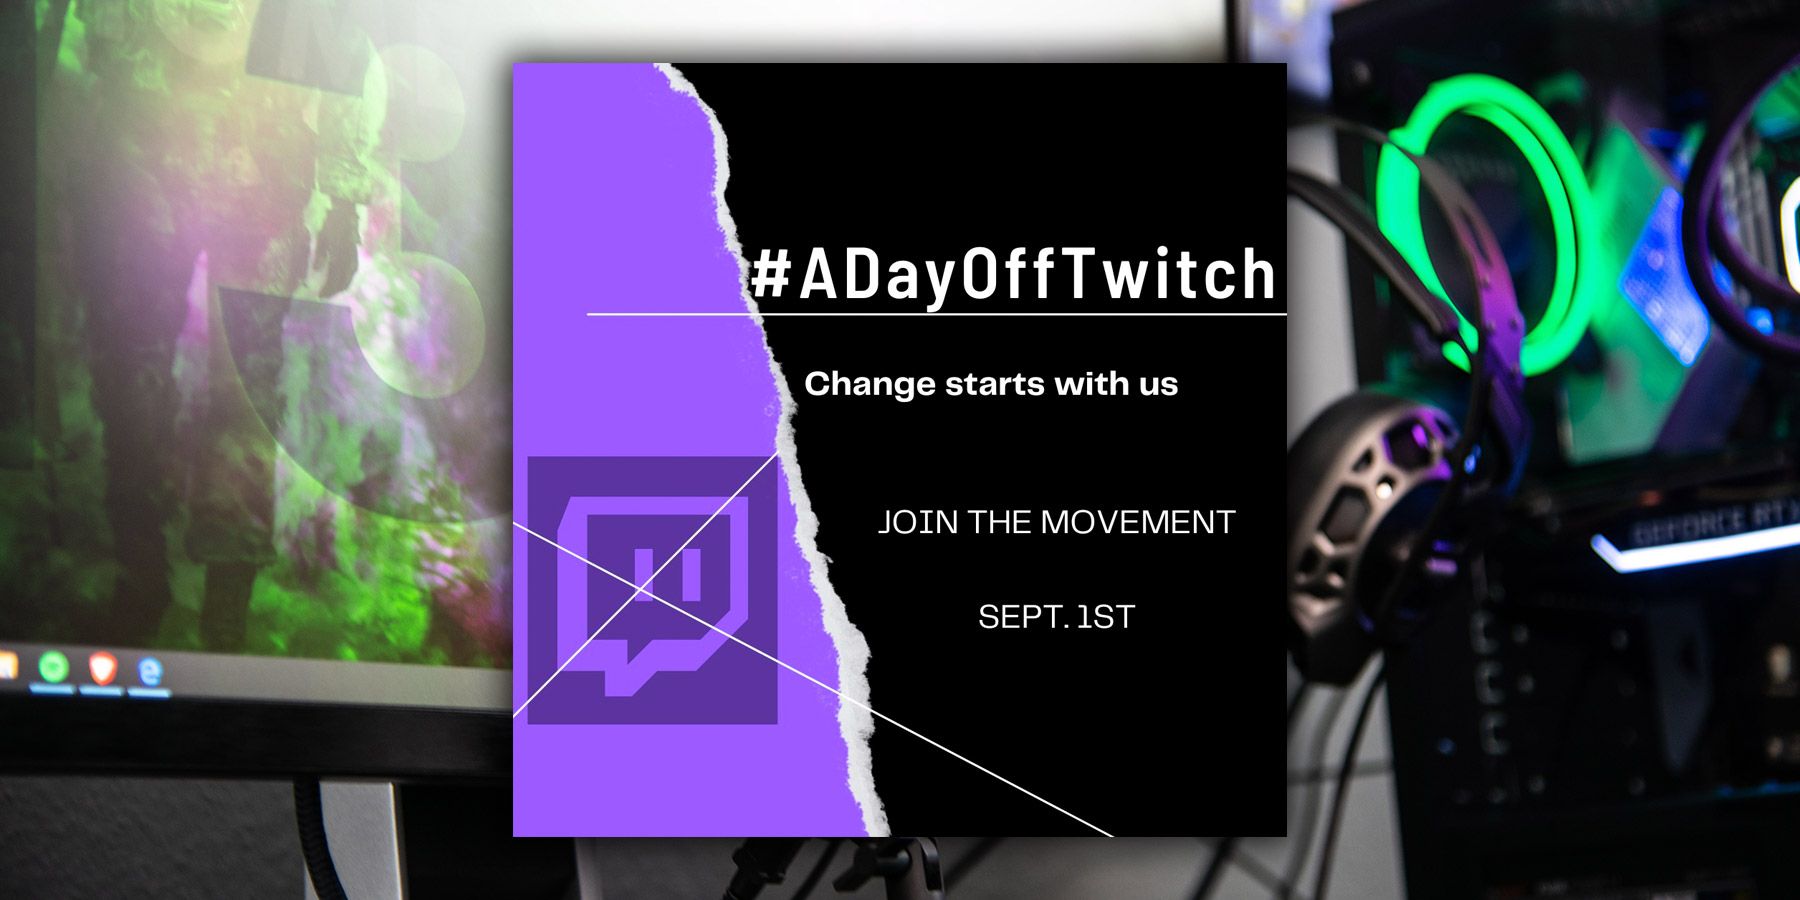 Day Off Twitch Movement